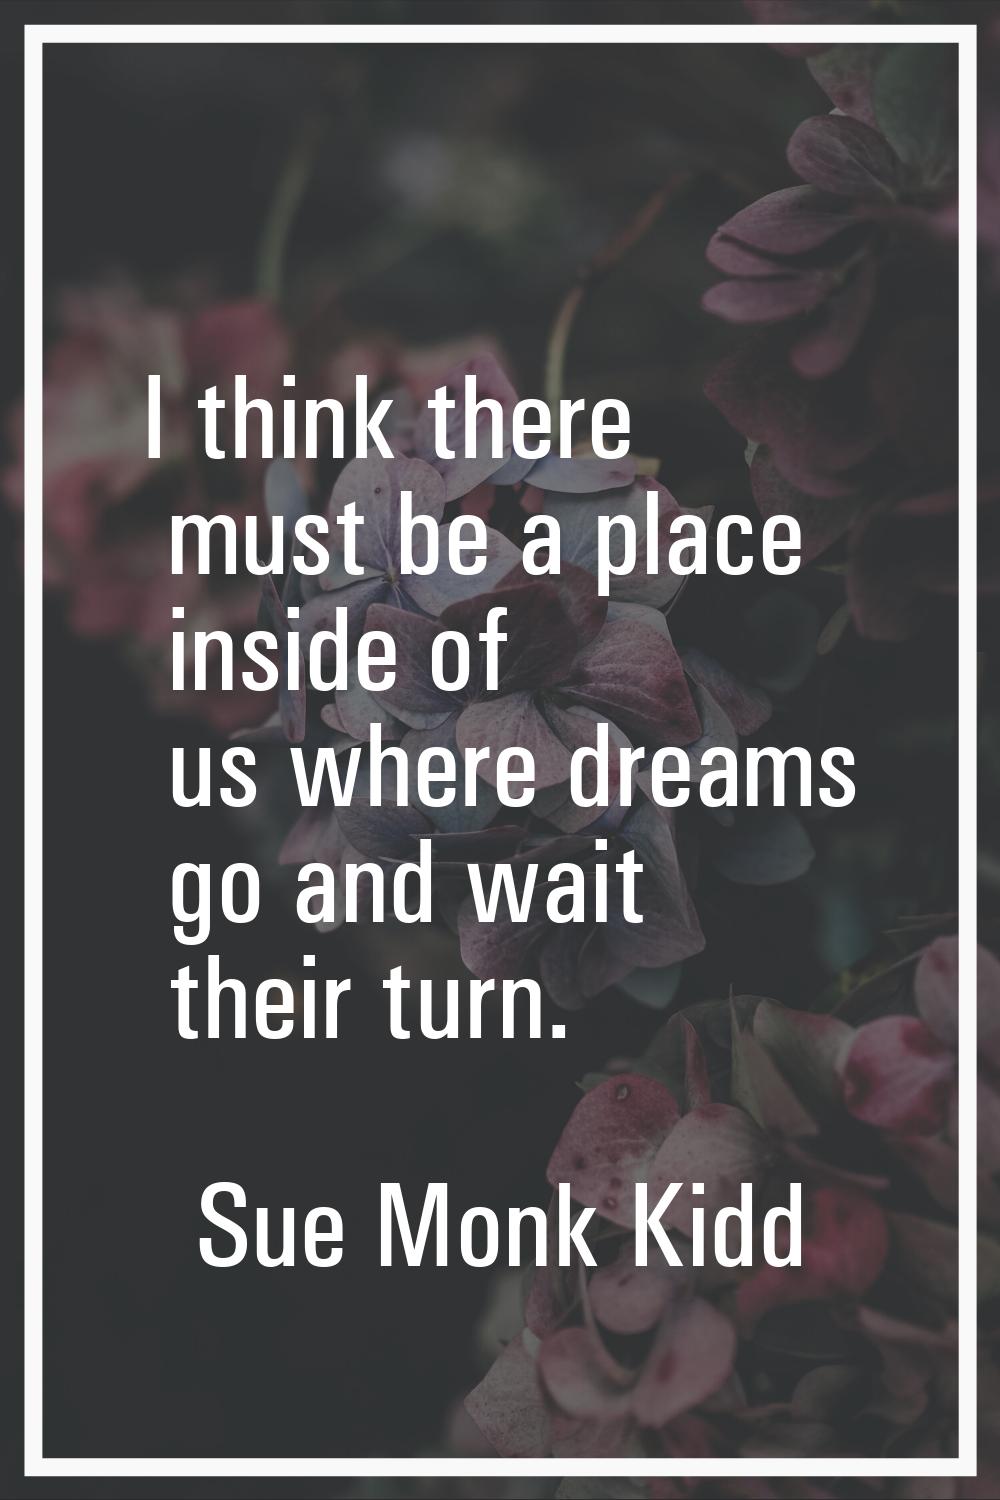 I think there must be a place inside of us where dreams go and wait their turn.